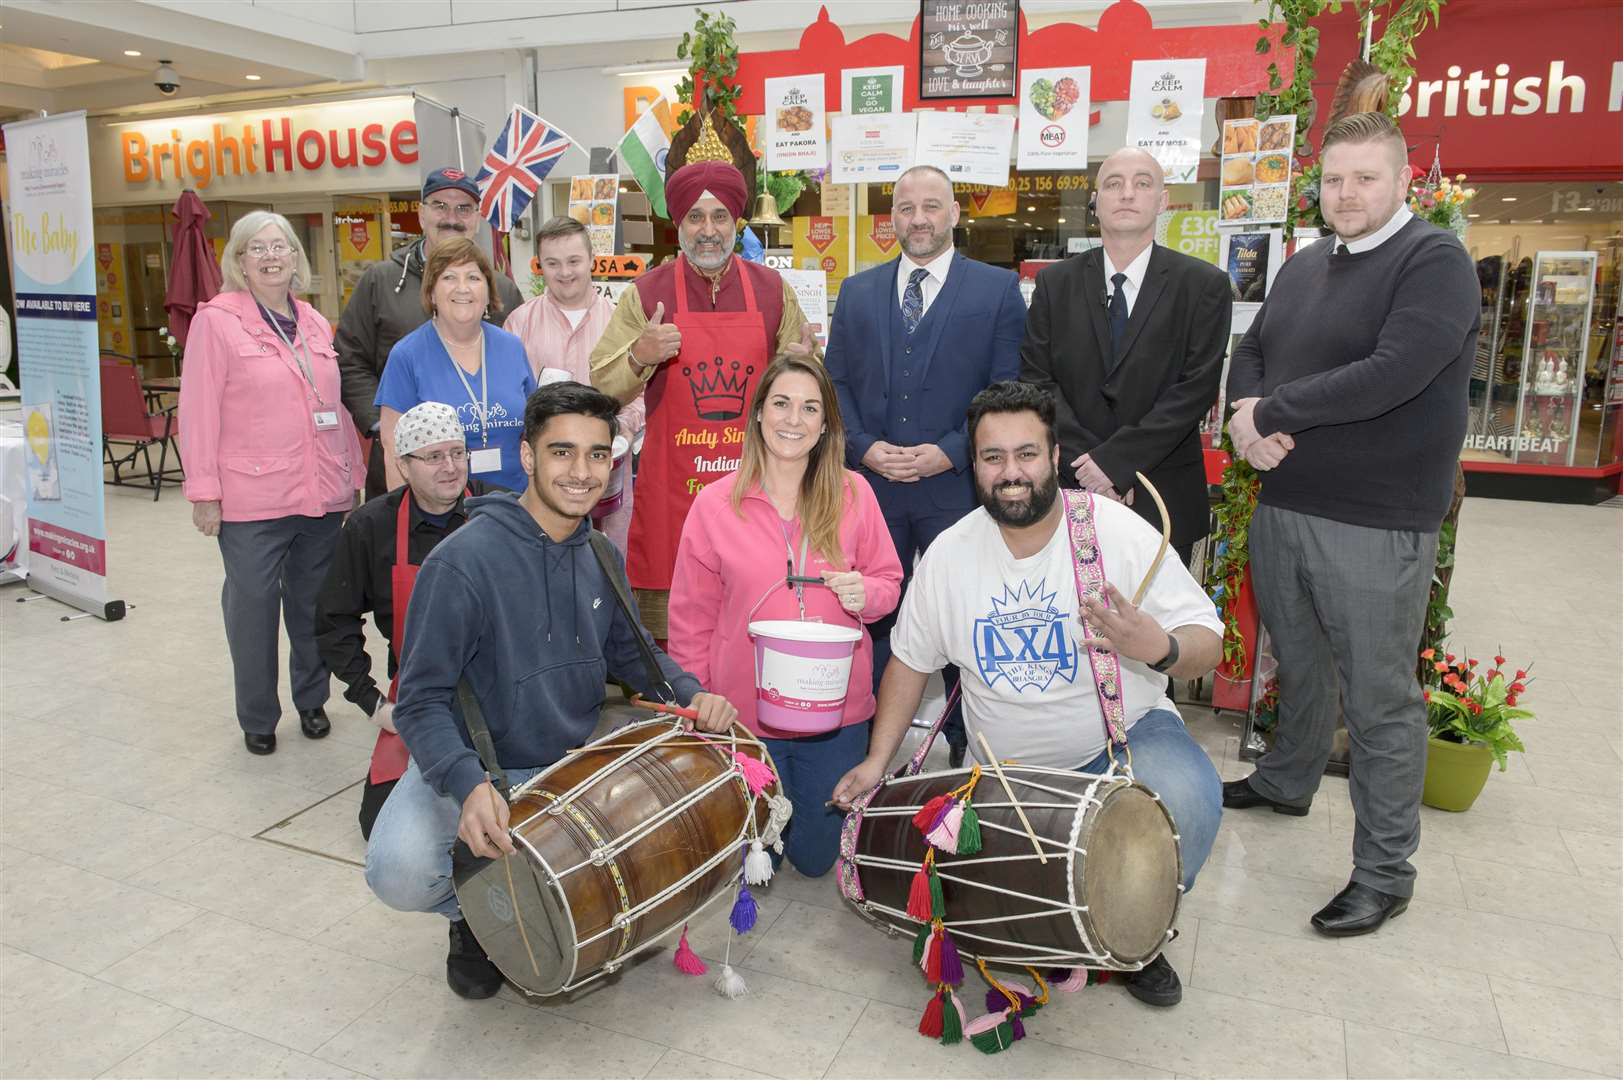 At front, drumming up support, from 4 x 4 are Bhangra drummers Surajsanger Sihota and Dhannjit Sihota. Indian street food seller and character Andy Singh holds a fundraiser for charity Making Miracles, at his stall in the Thamesgate Shopping Centre, Gravesend. Picture: Andy Payton (1415306)